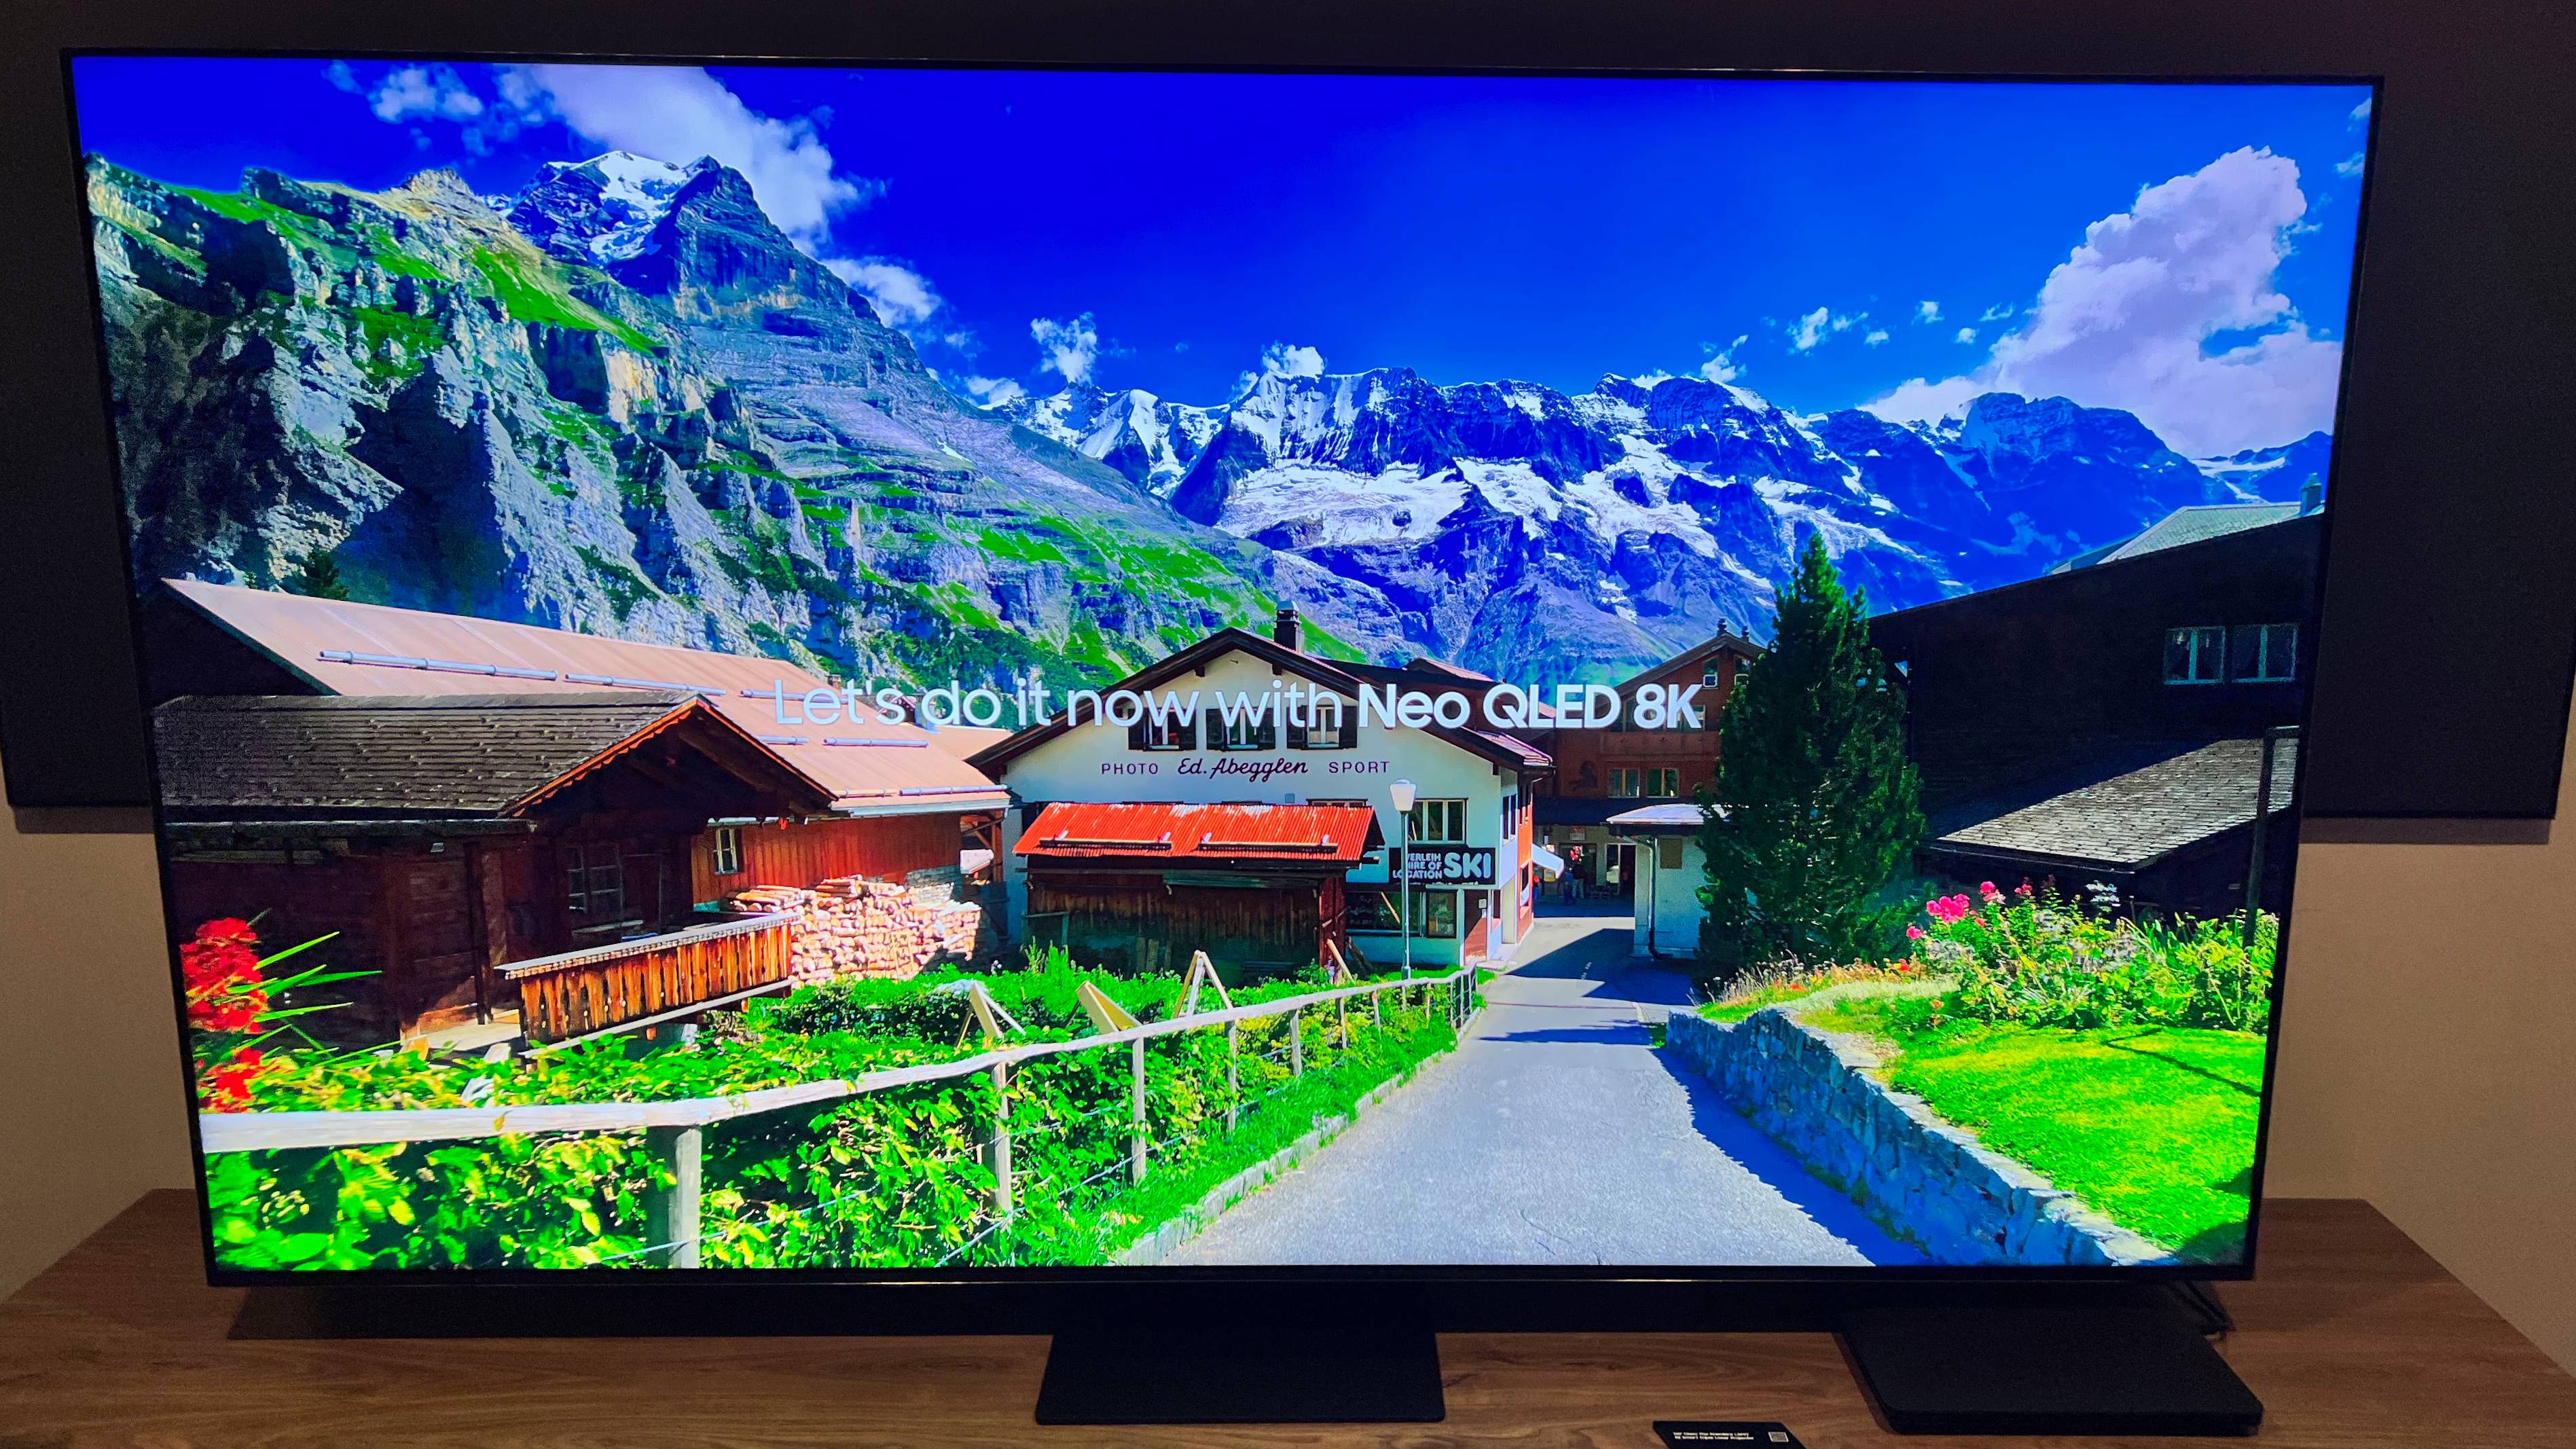 Samsung's 2022 QLED TVs include the first 144Hz 4K and 8K sets